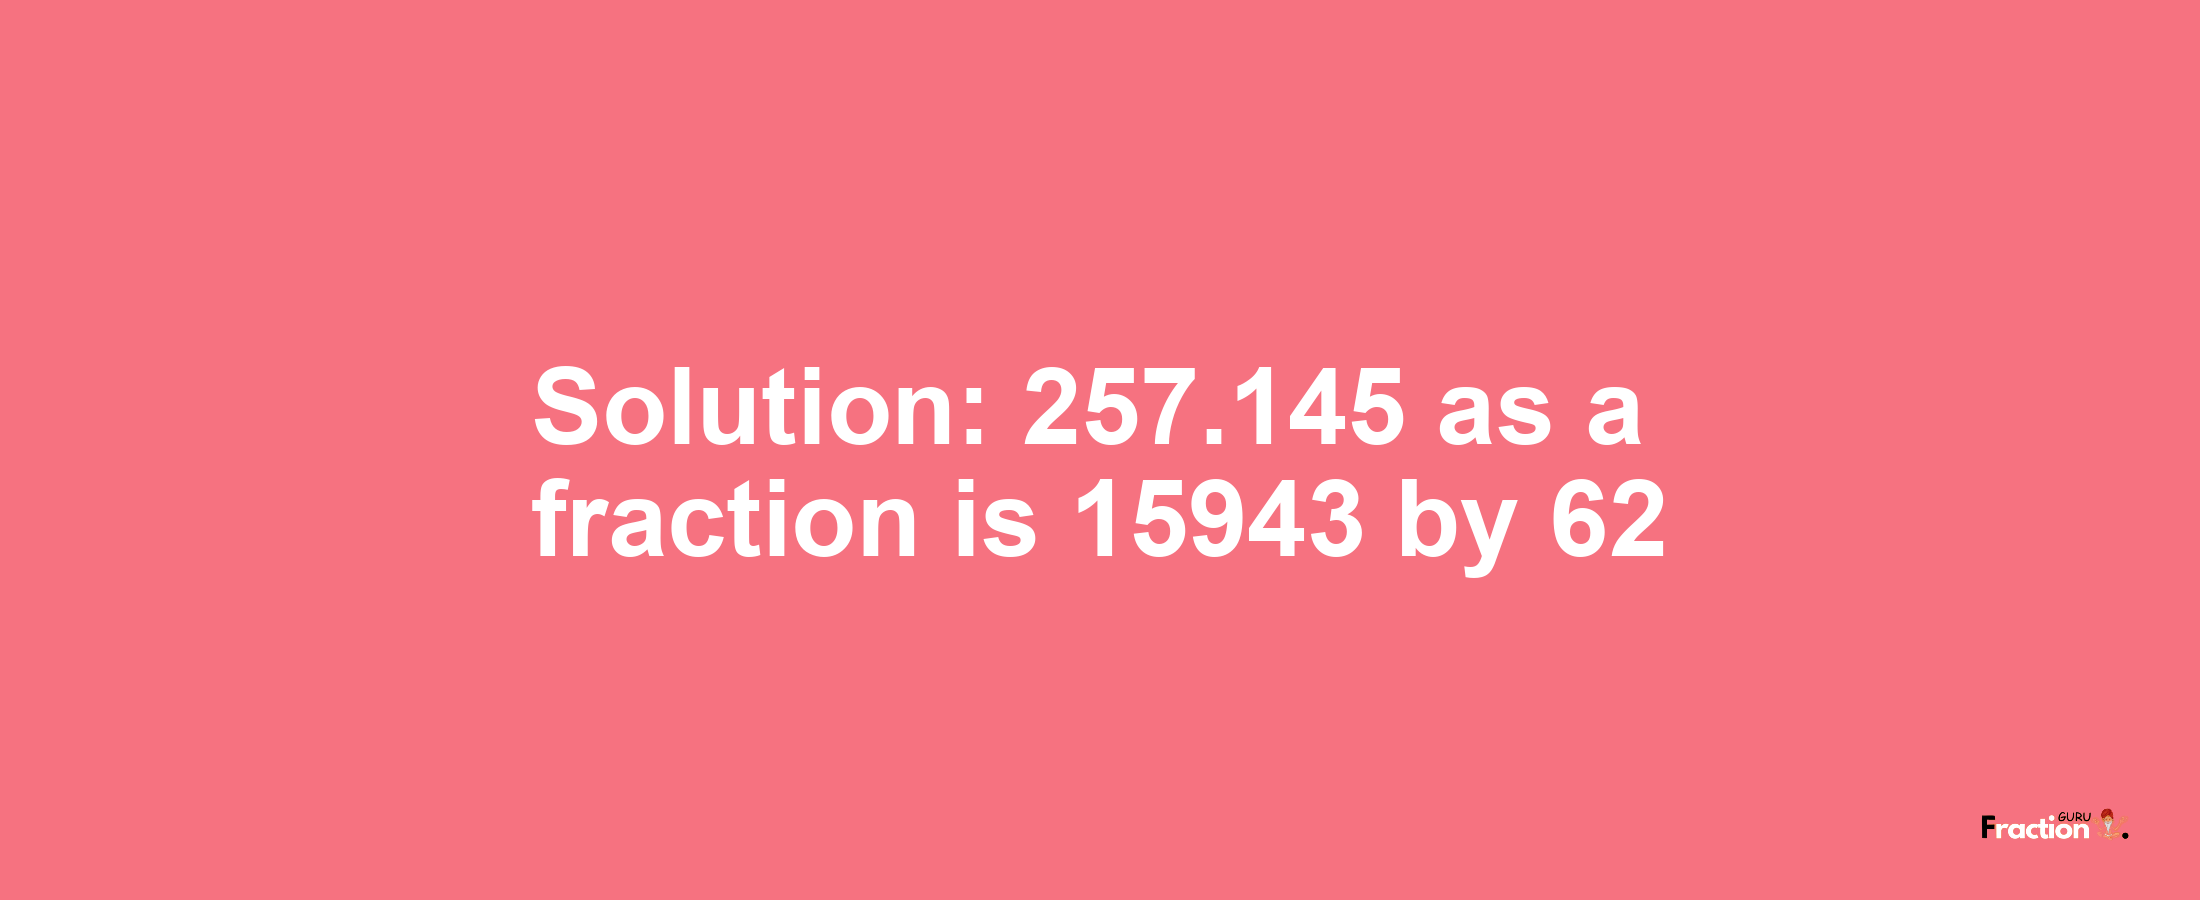 Solution:257.145 as a fraction is 15943/62